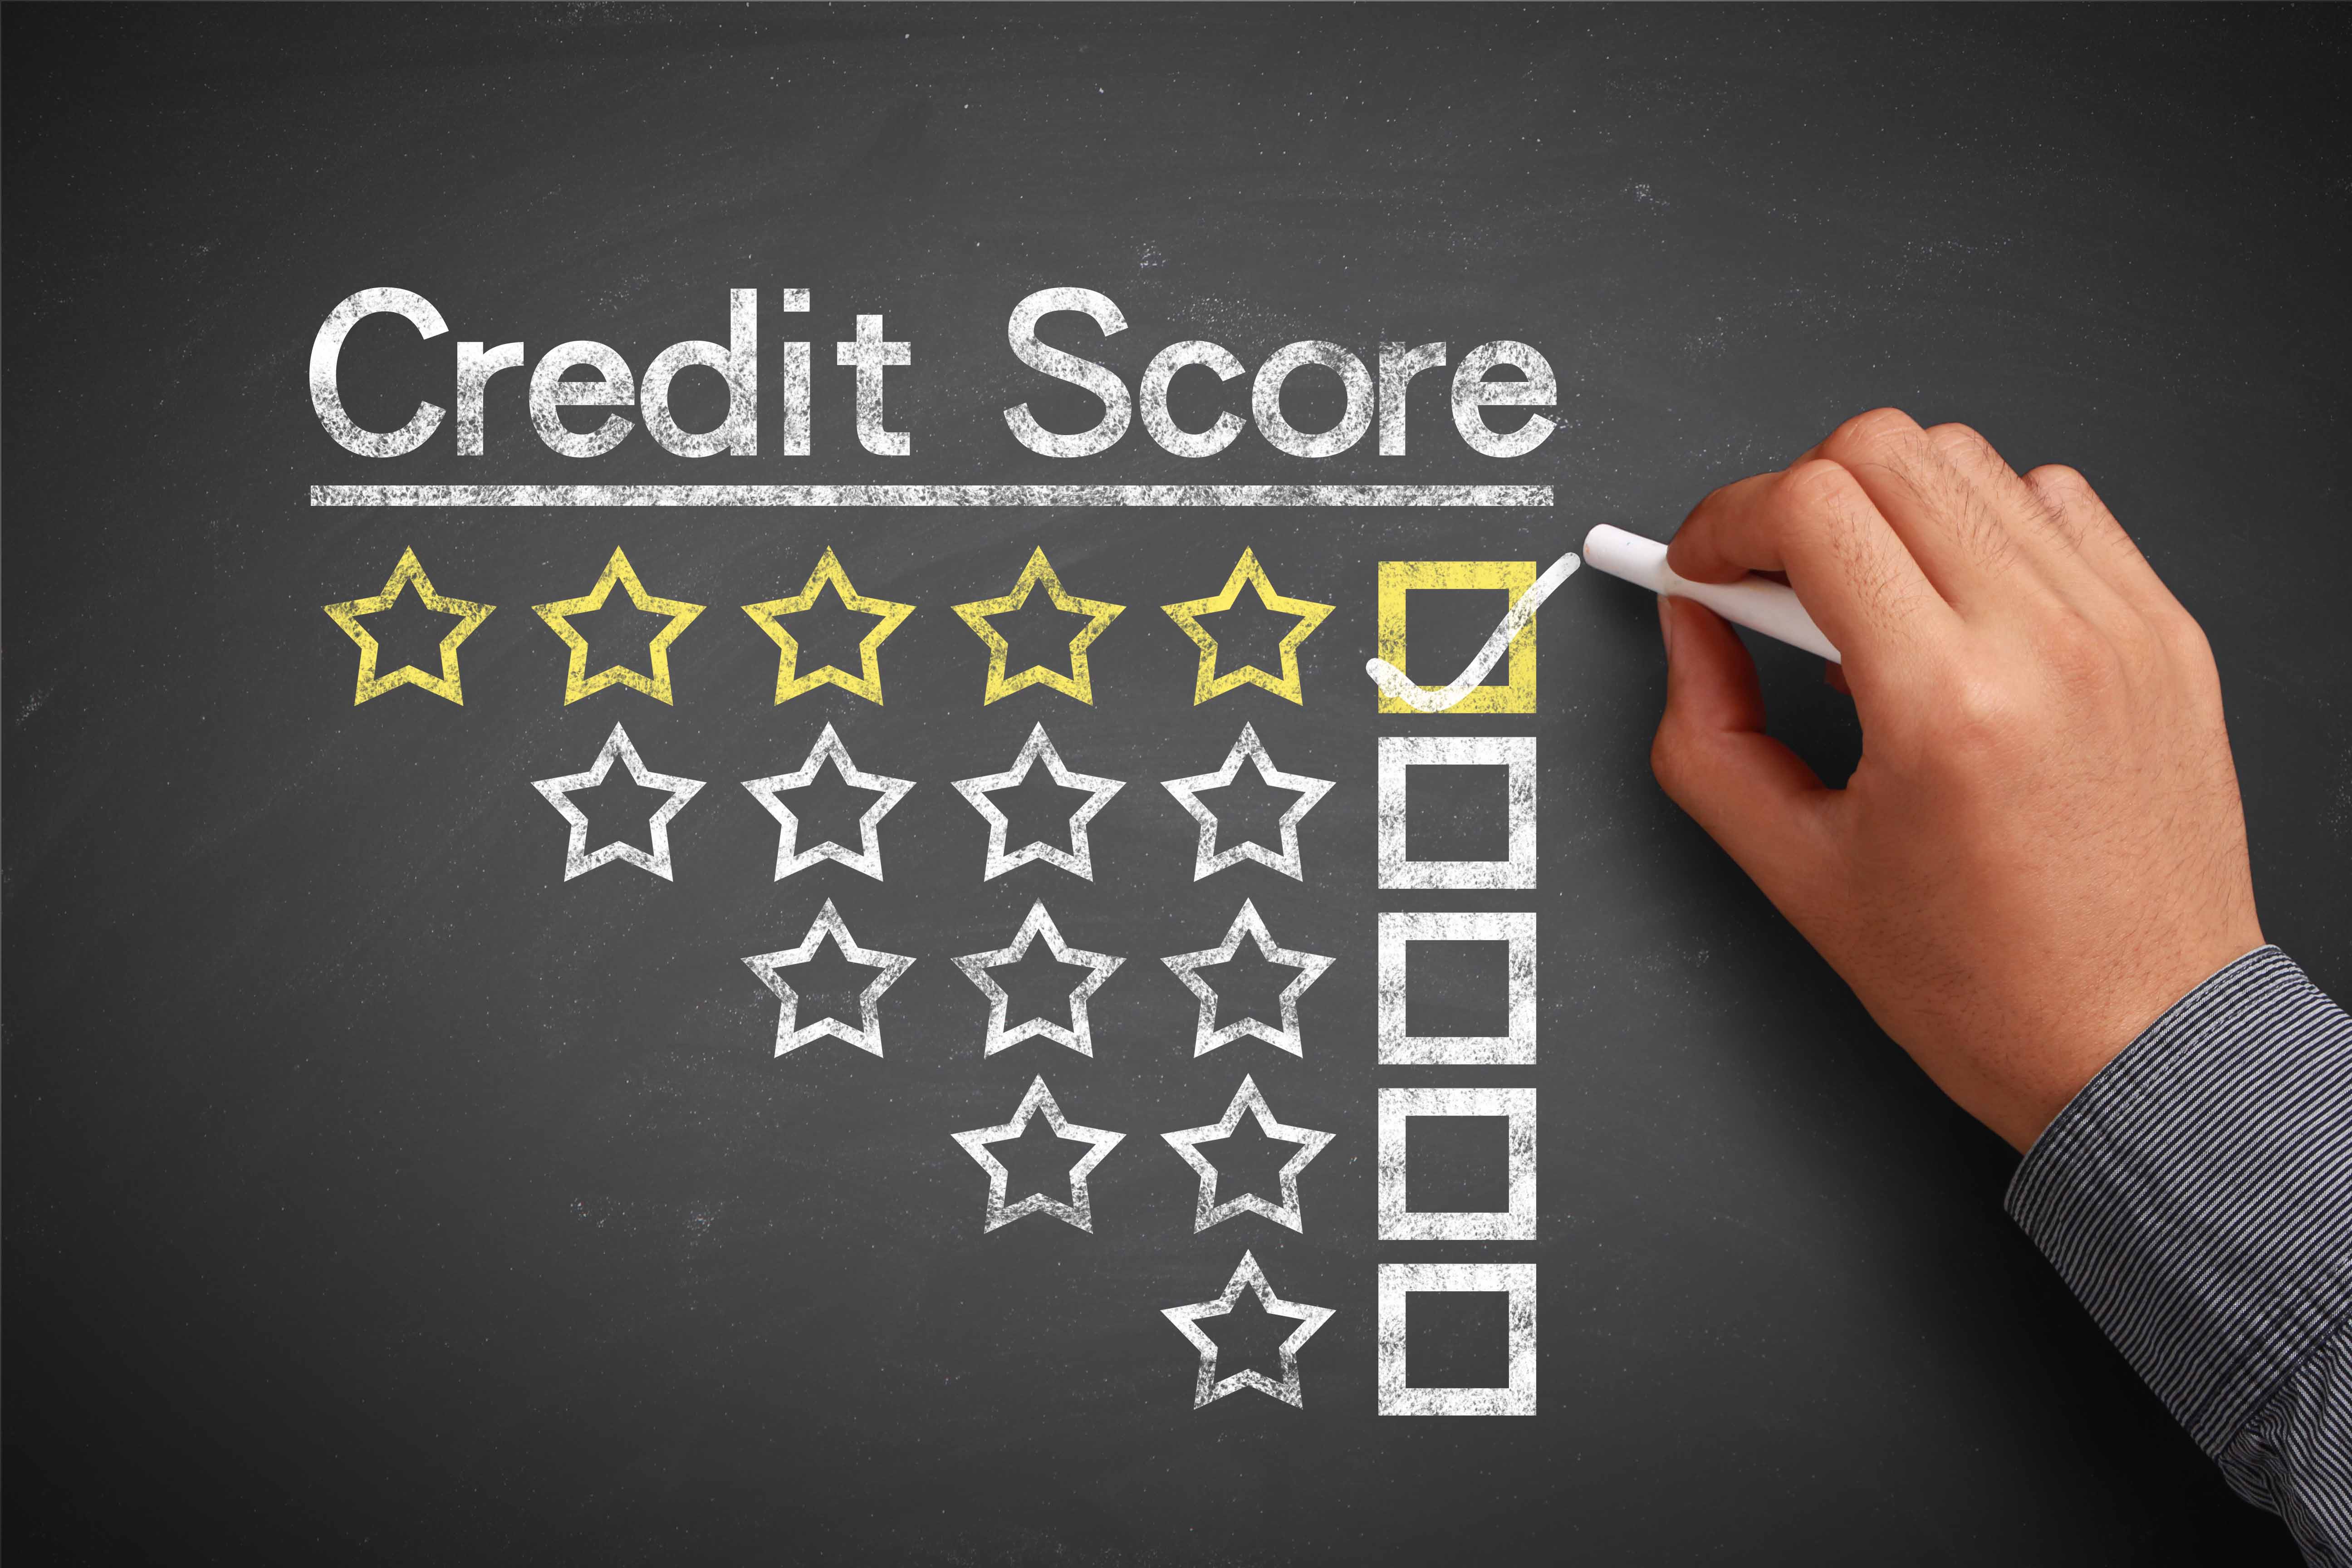 What's a credit score and how can you improve yours?